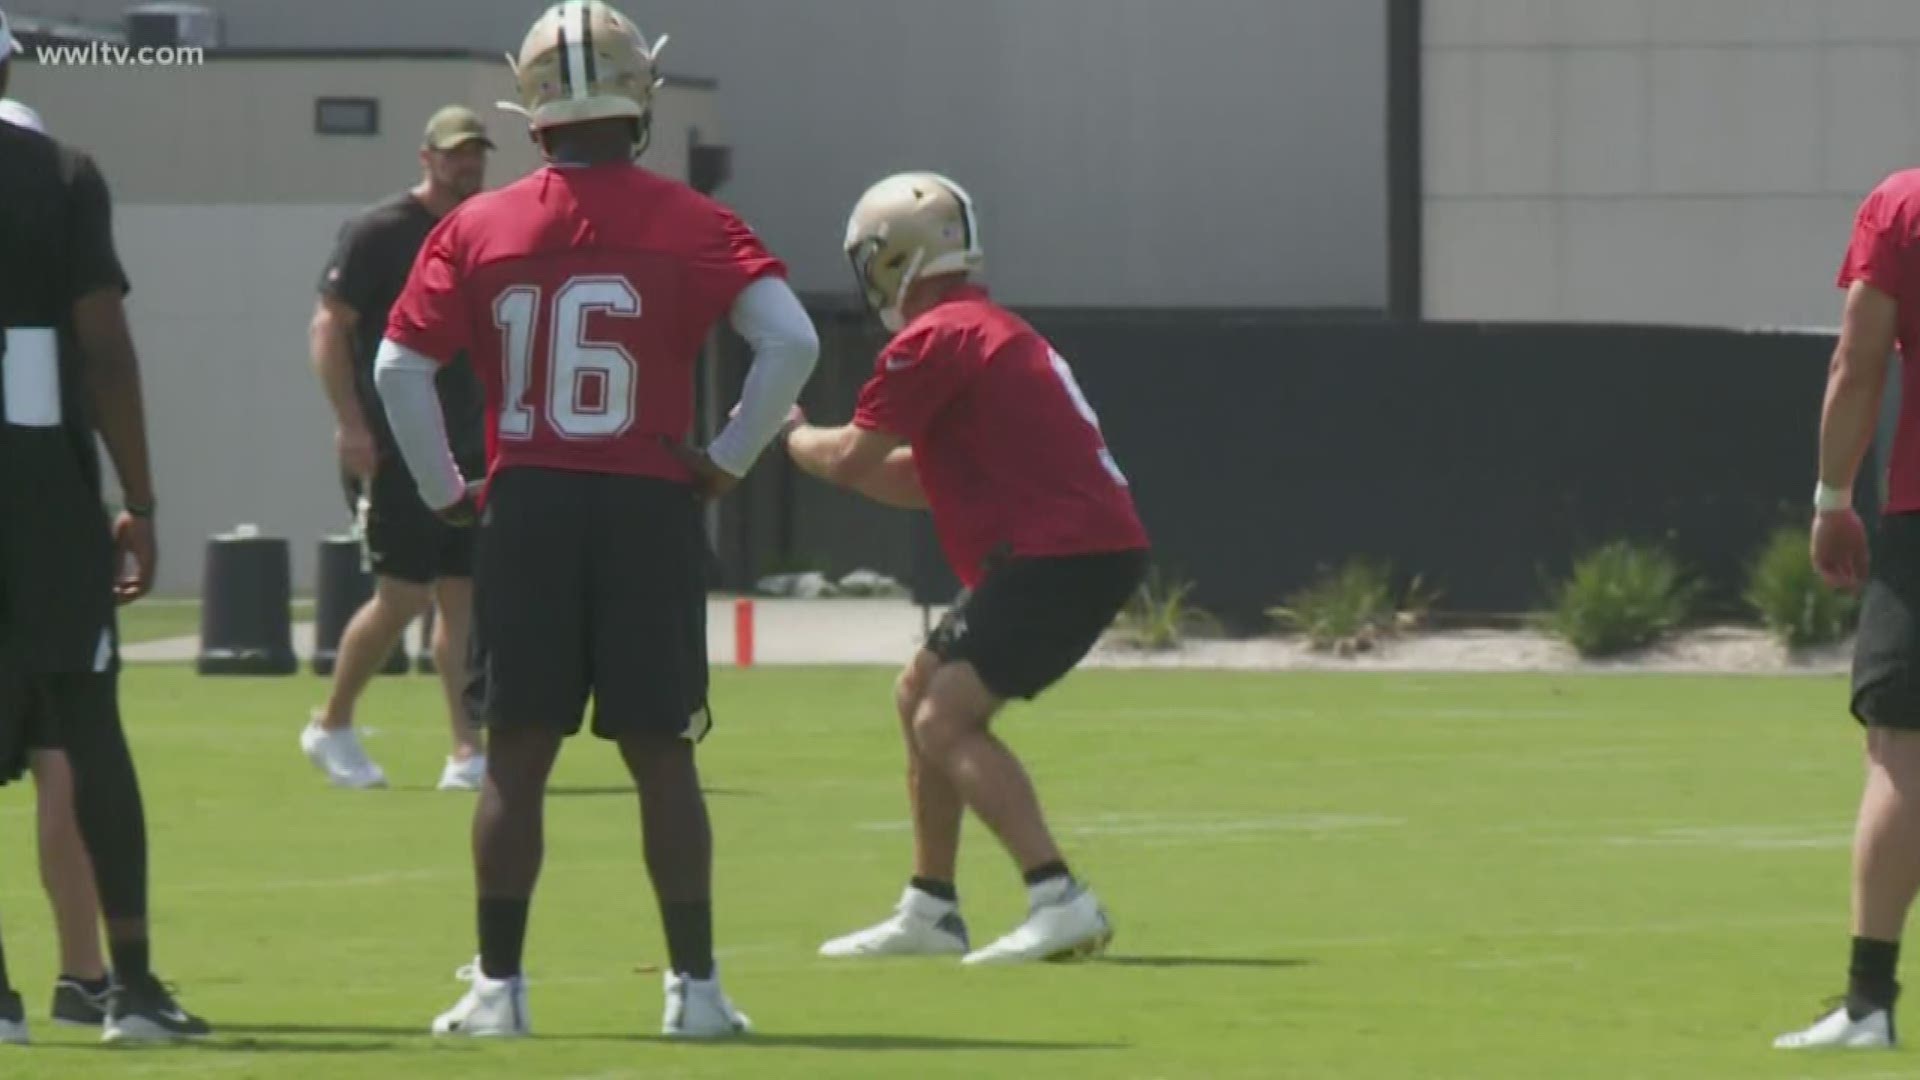 WWL-TV catches up with Saints columnist for The Athletic Larry Holder to break down New Orleans Saints' Training Camp Day 1.